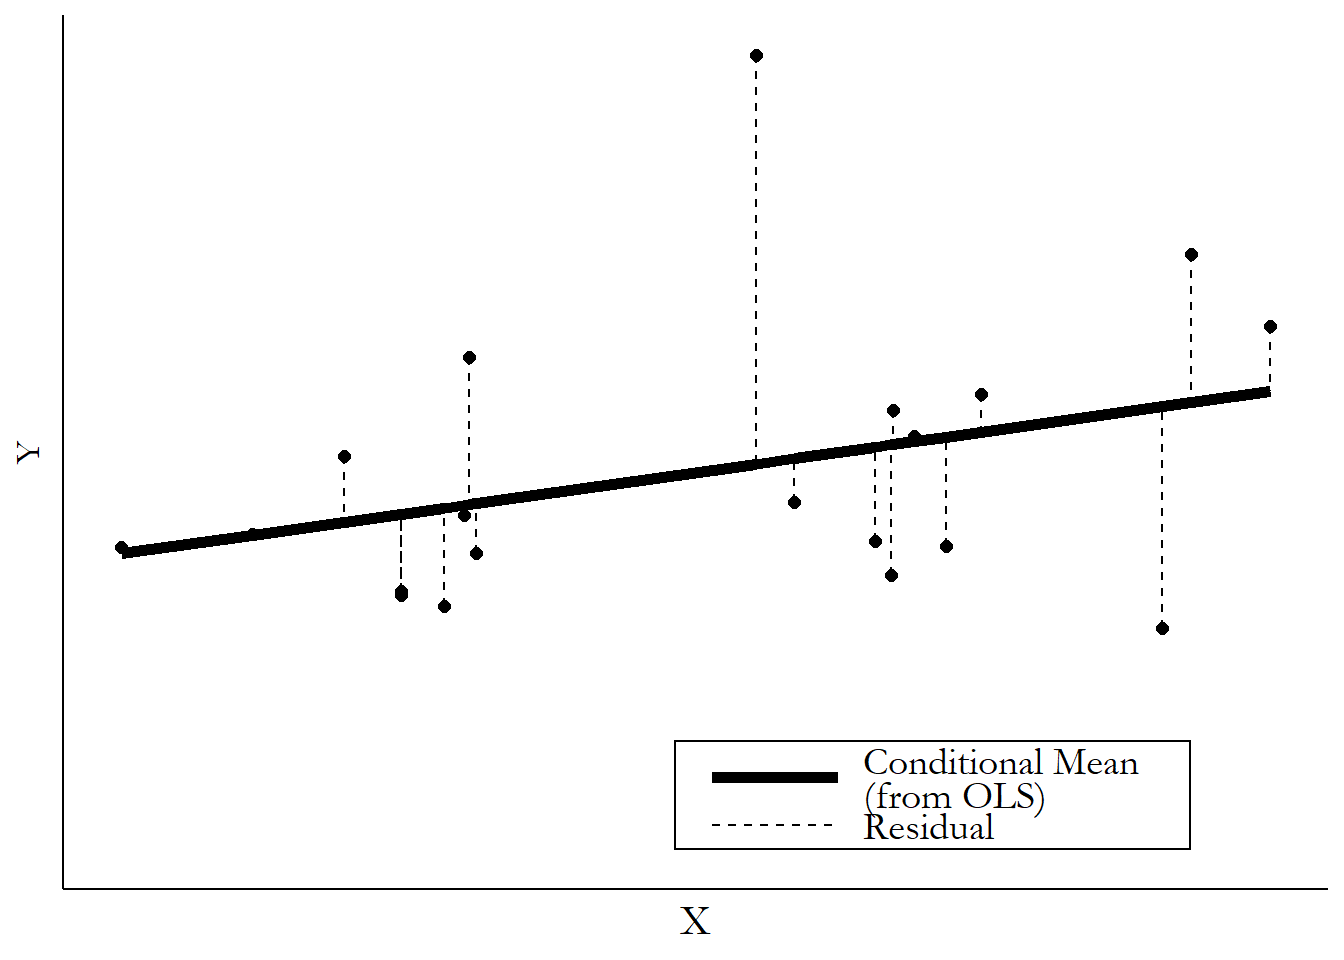 A scatterplot with an overlaid fitted line showing that a residual is the vertical distance from each point to the line